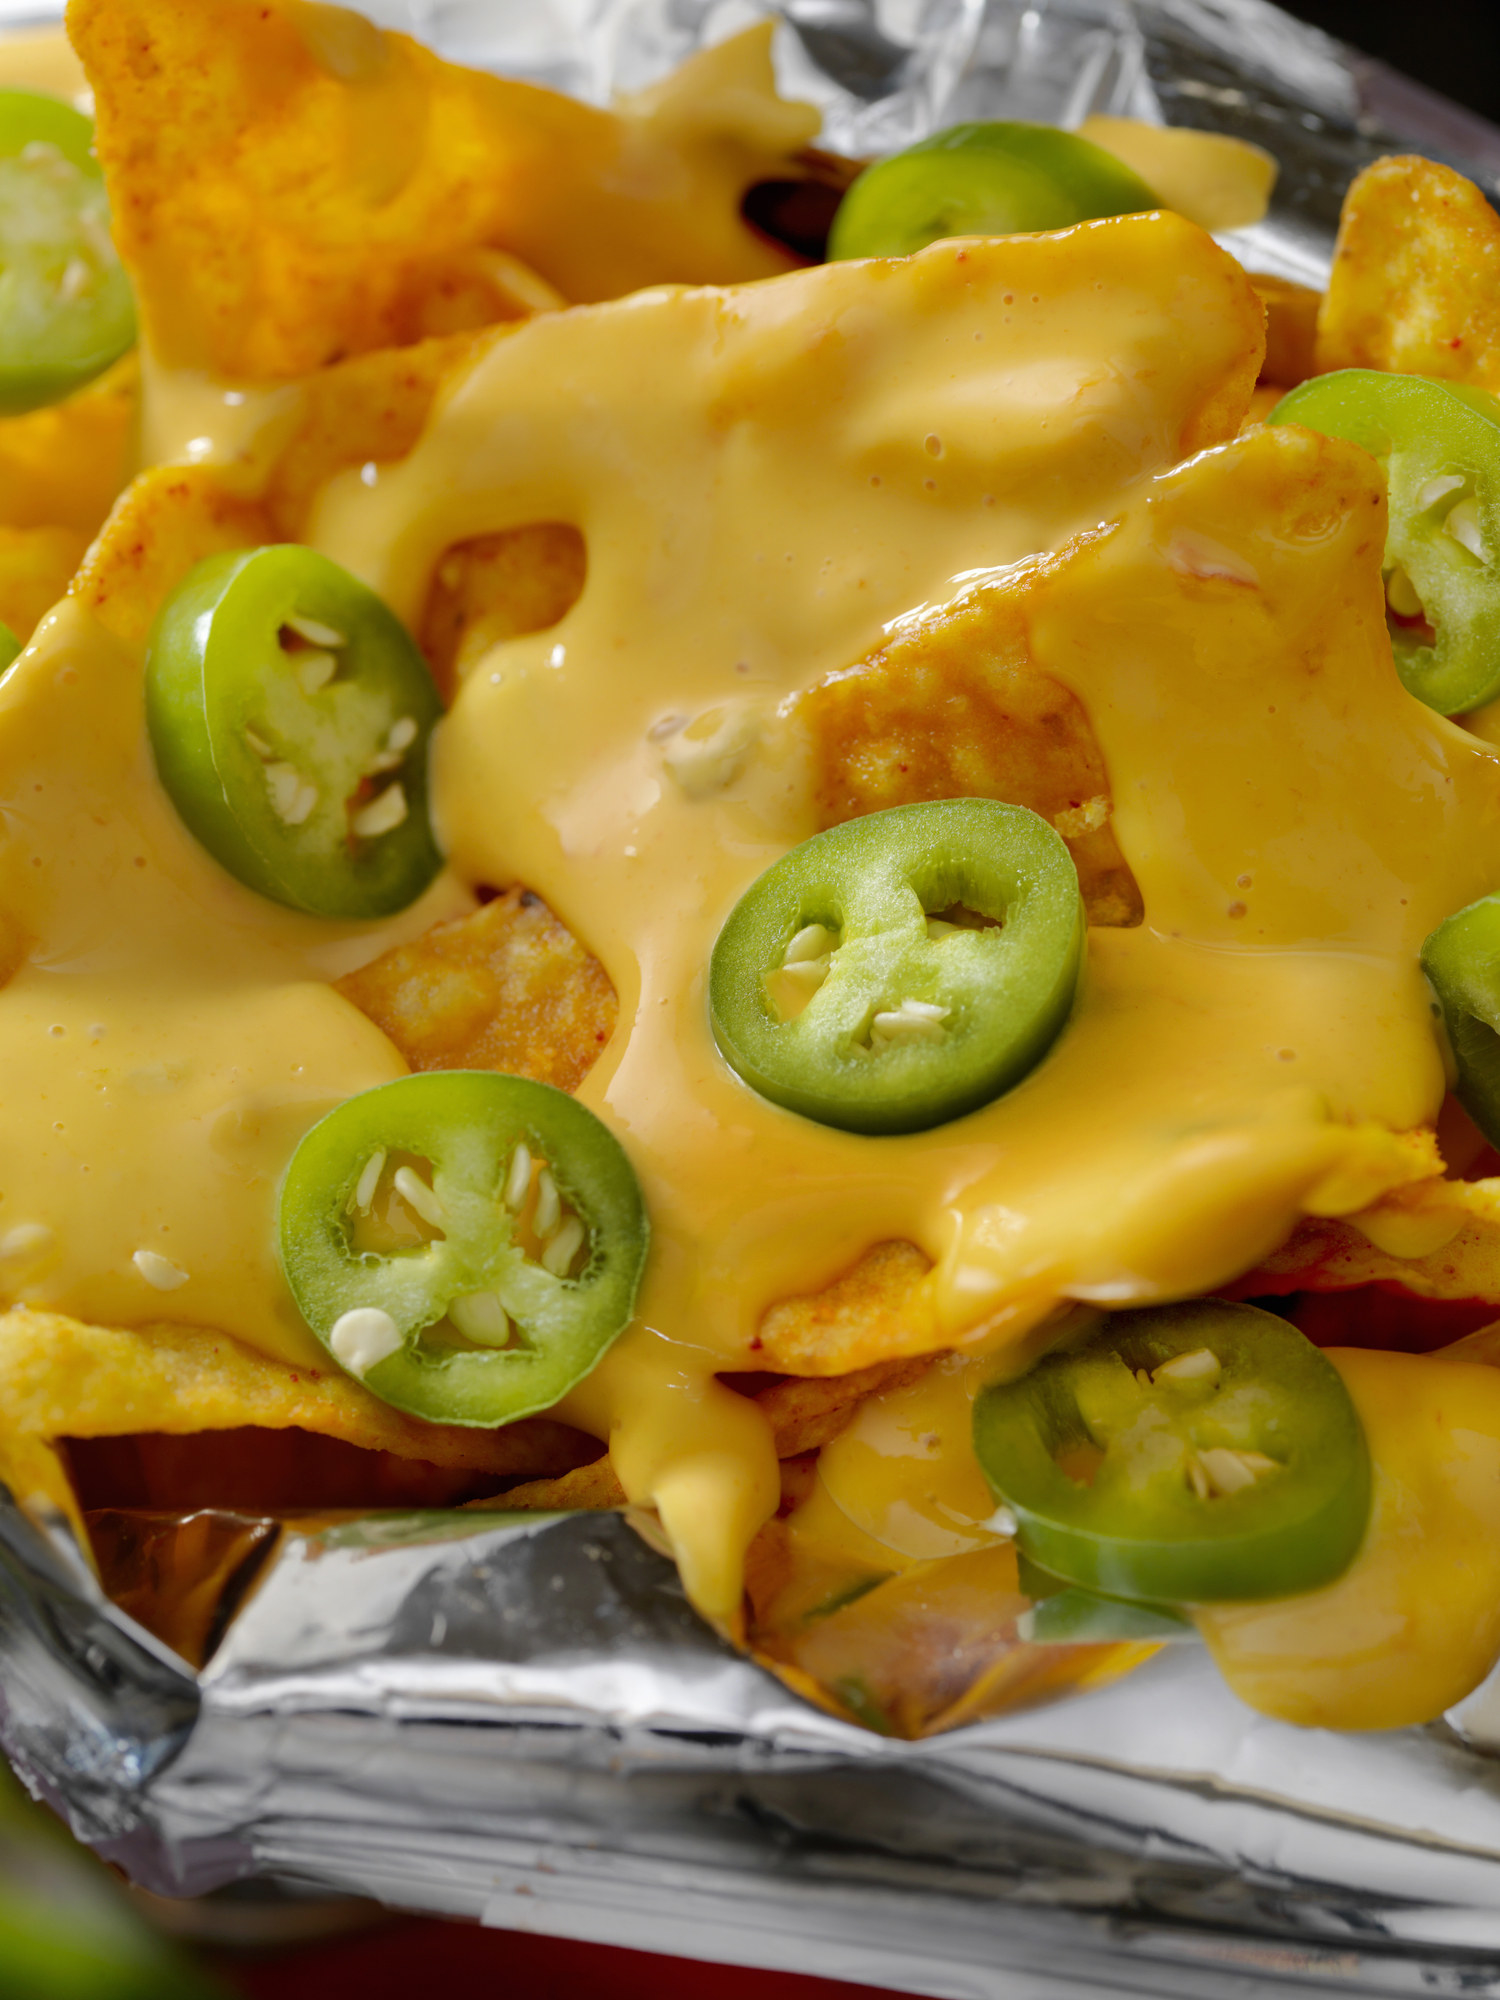 Tortilla chips with cheese sauce and jalapeños